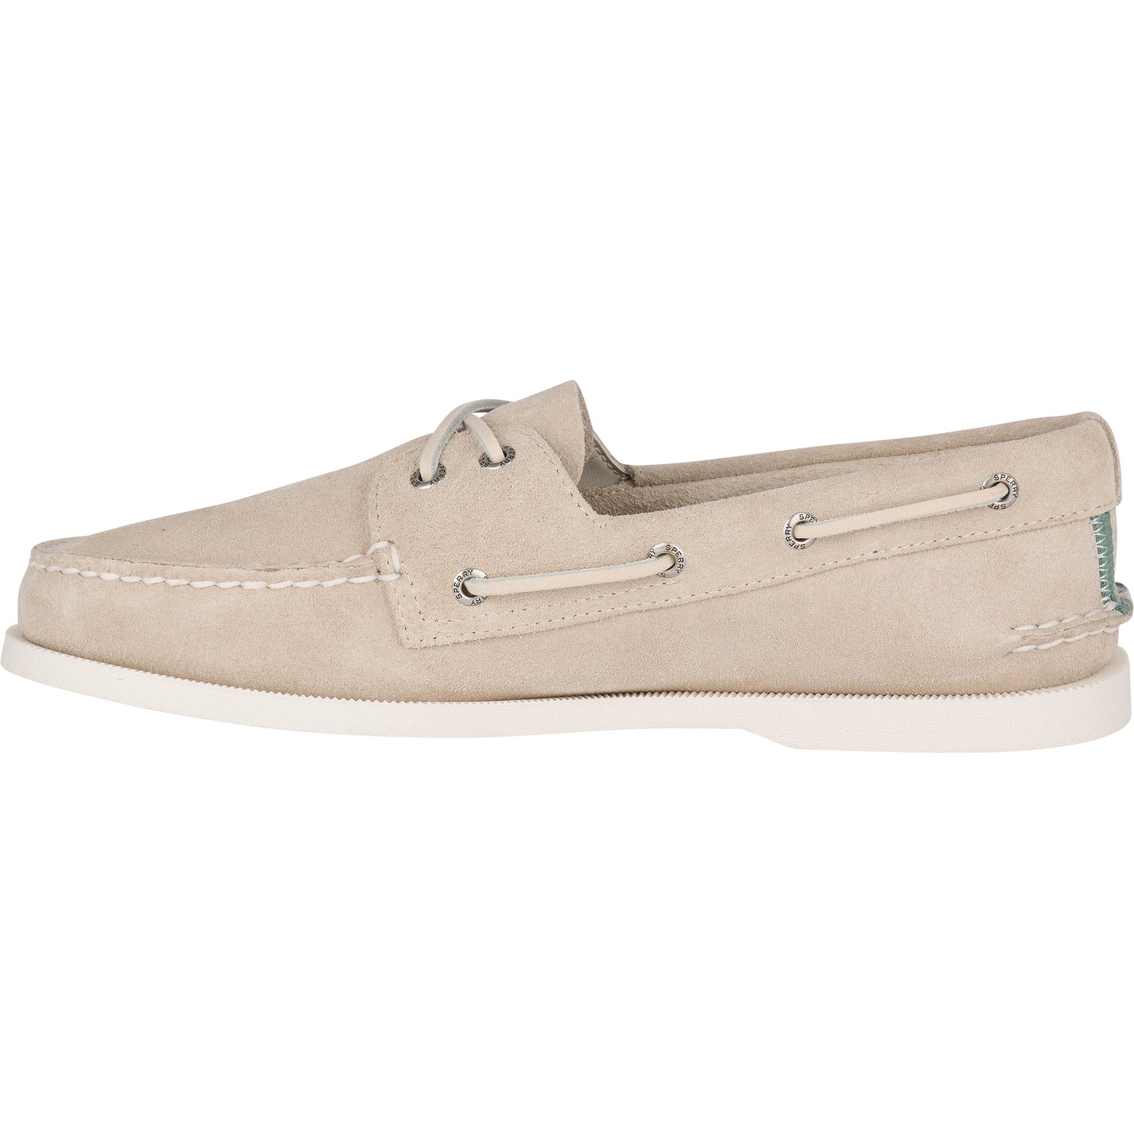 Sperry Authentic Original 2 Eye Summer Suede Boat Shoes - Image 3 of 6